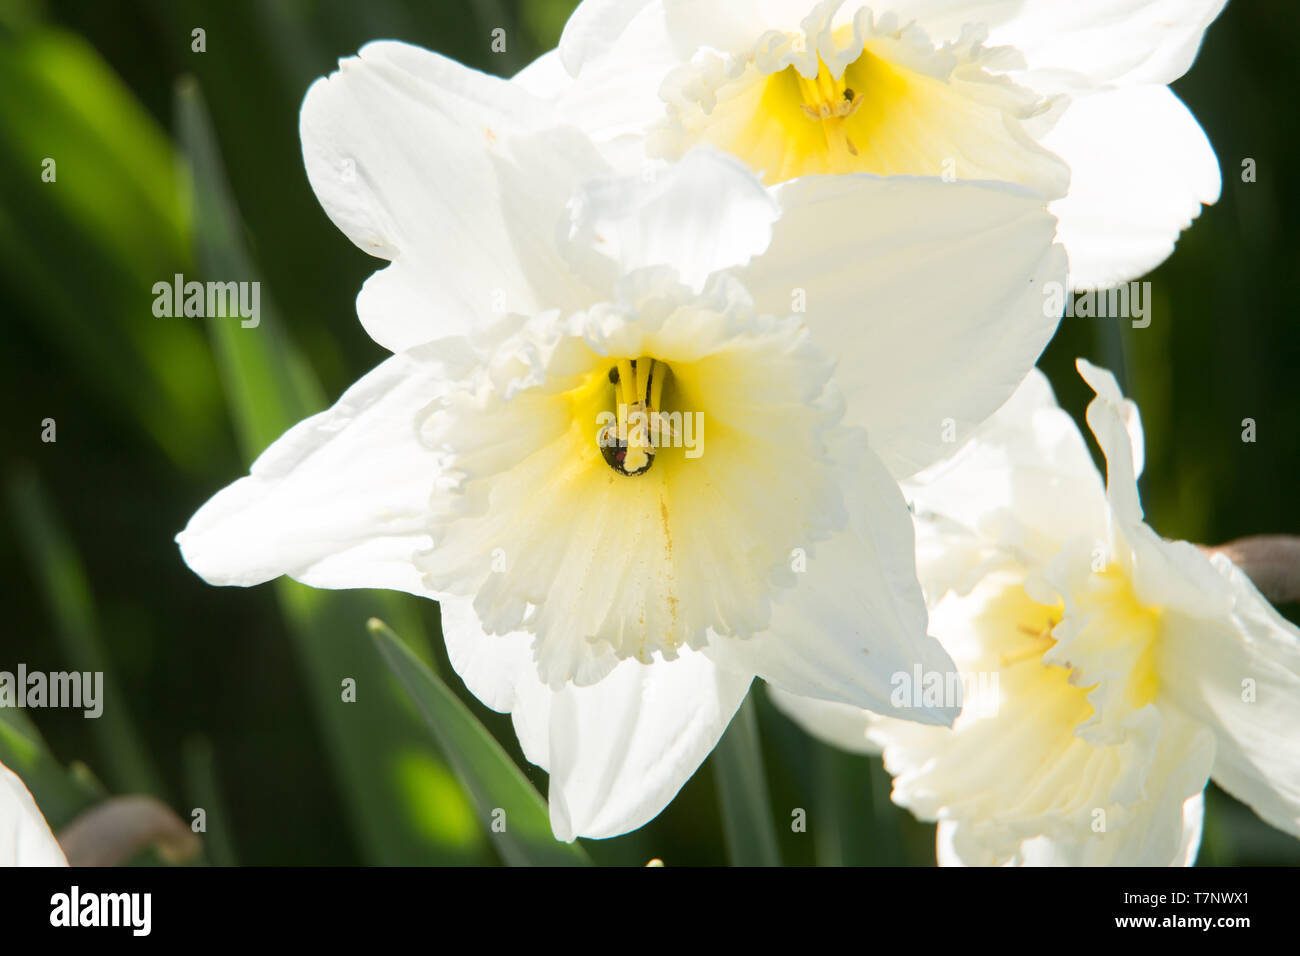 White Daffodils, Narcissus, flowering in the Spring sunshine Stock Photo